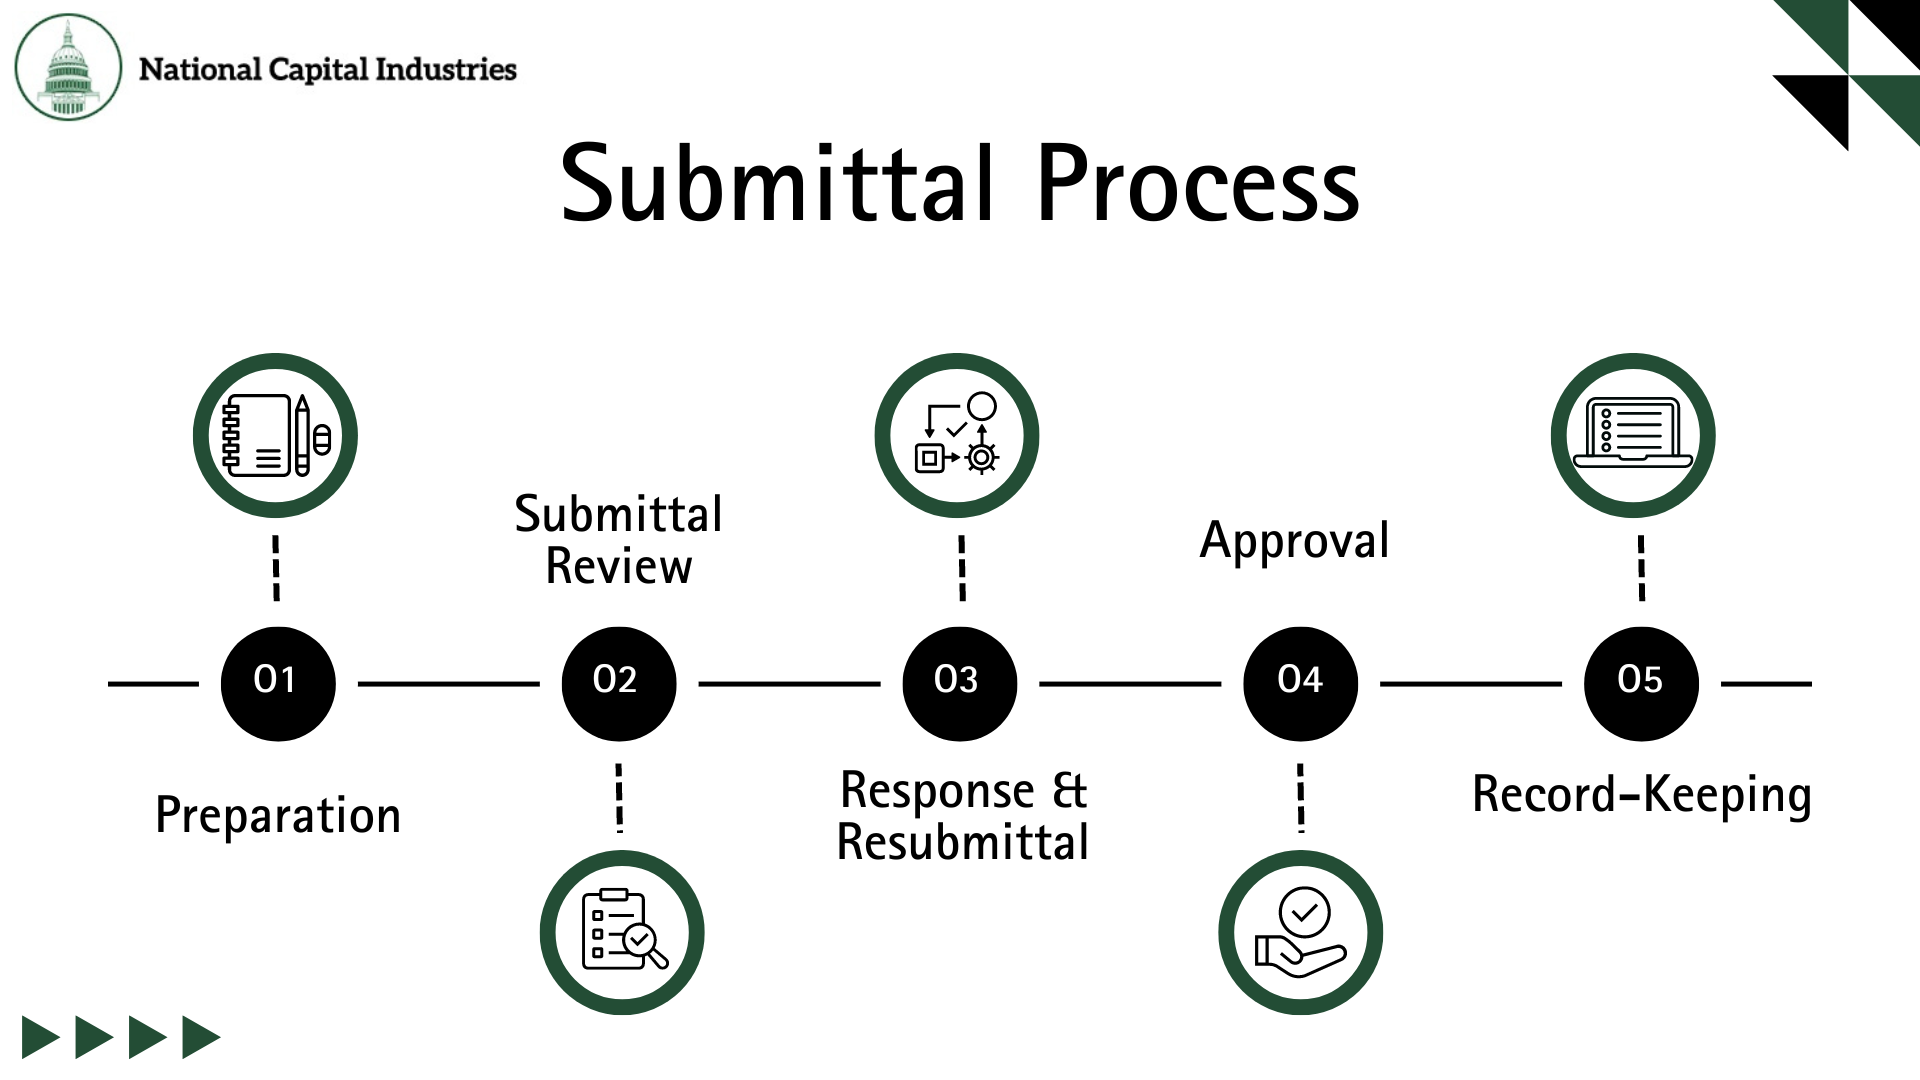 Infographic for NatCap outlining the exact steps to complete a submittal in construction